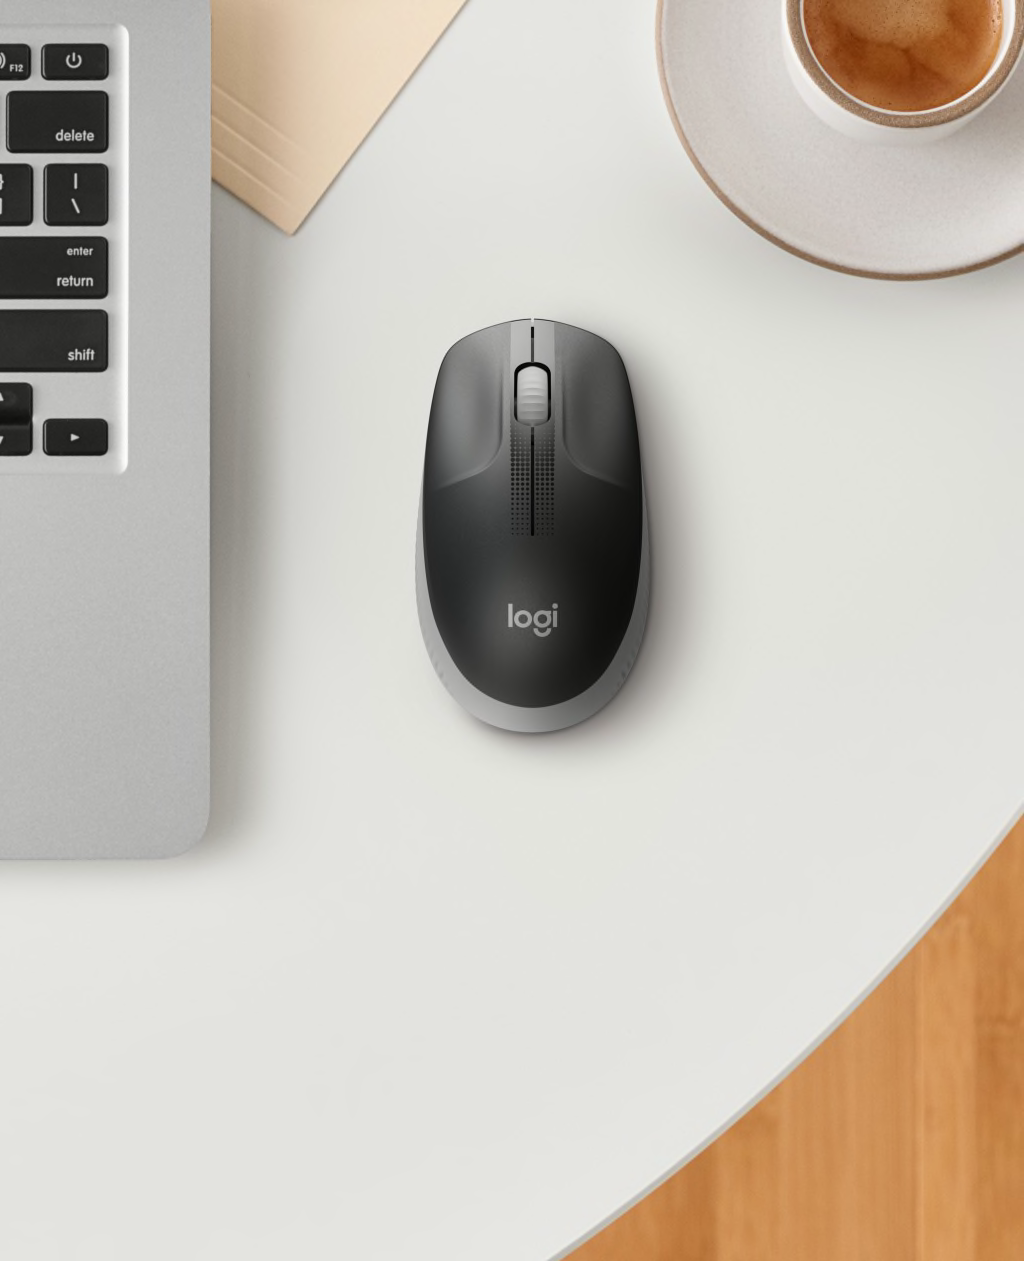 m190-wireless-mouse-feature-03-tablet